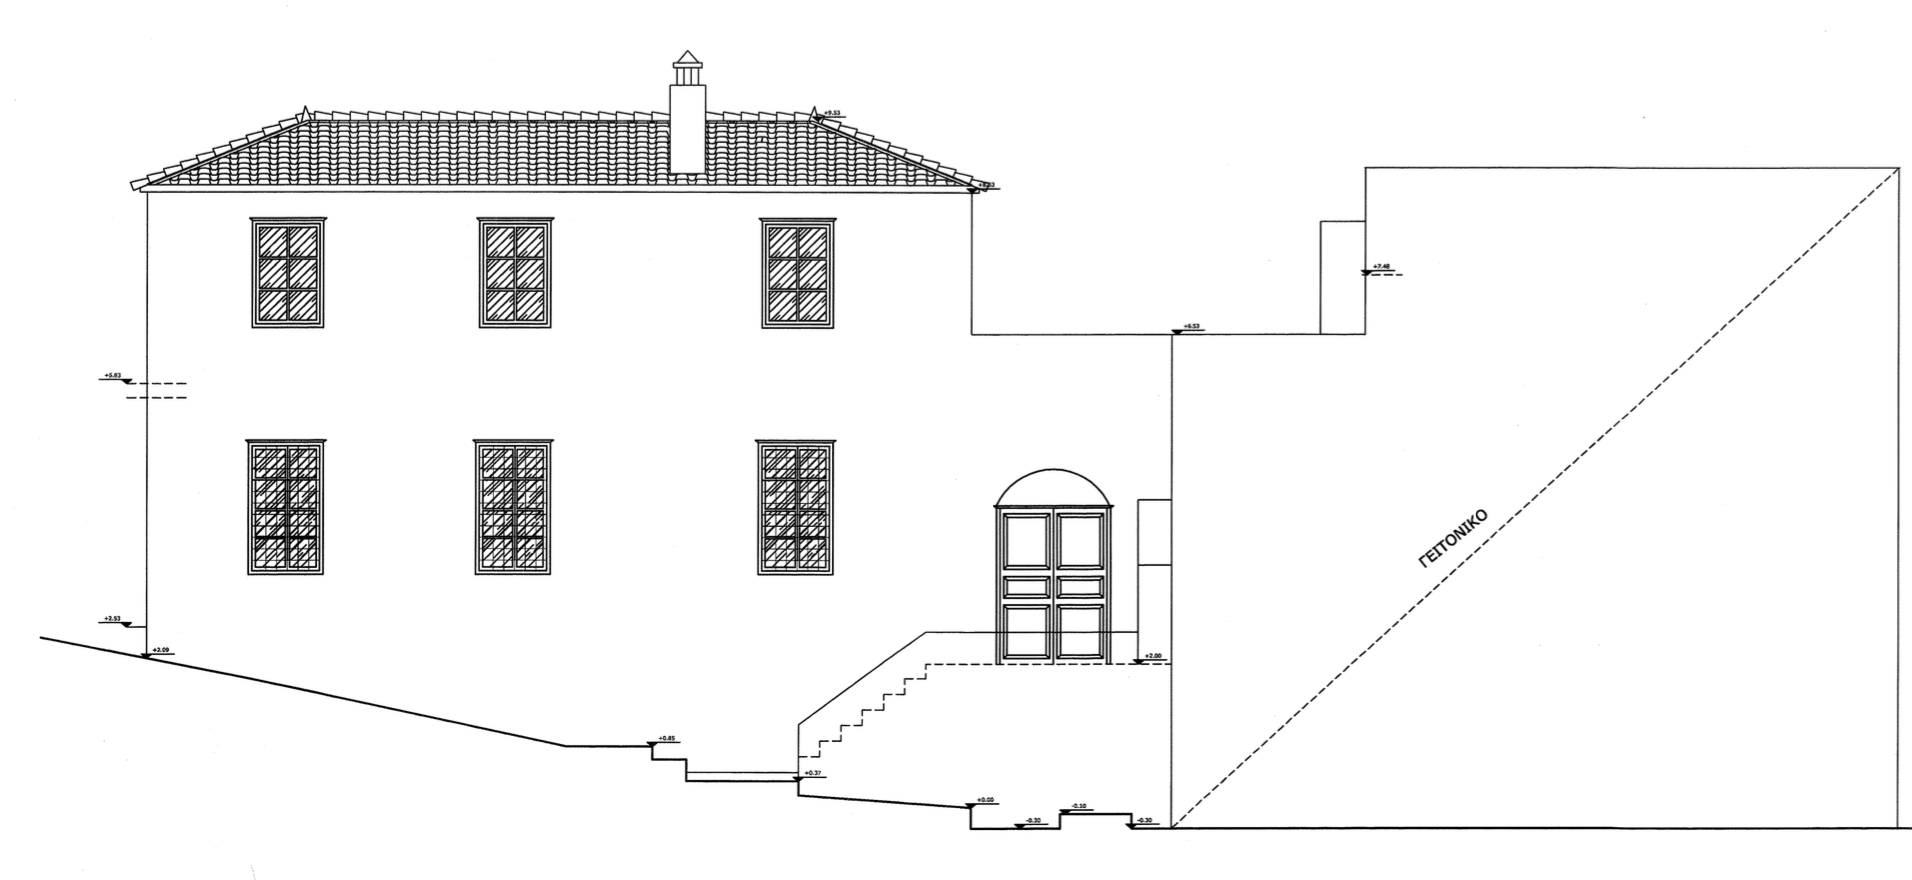 Building plot with planning permit for 5 bedroom house for sale on Hydra Island Greece